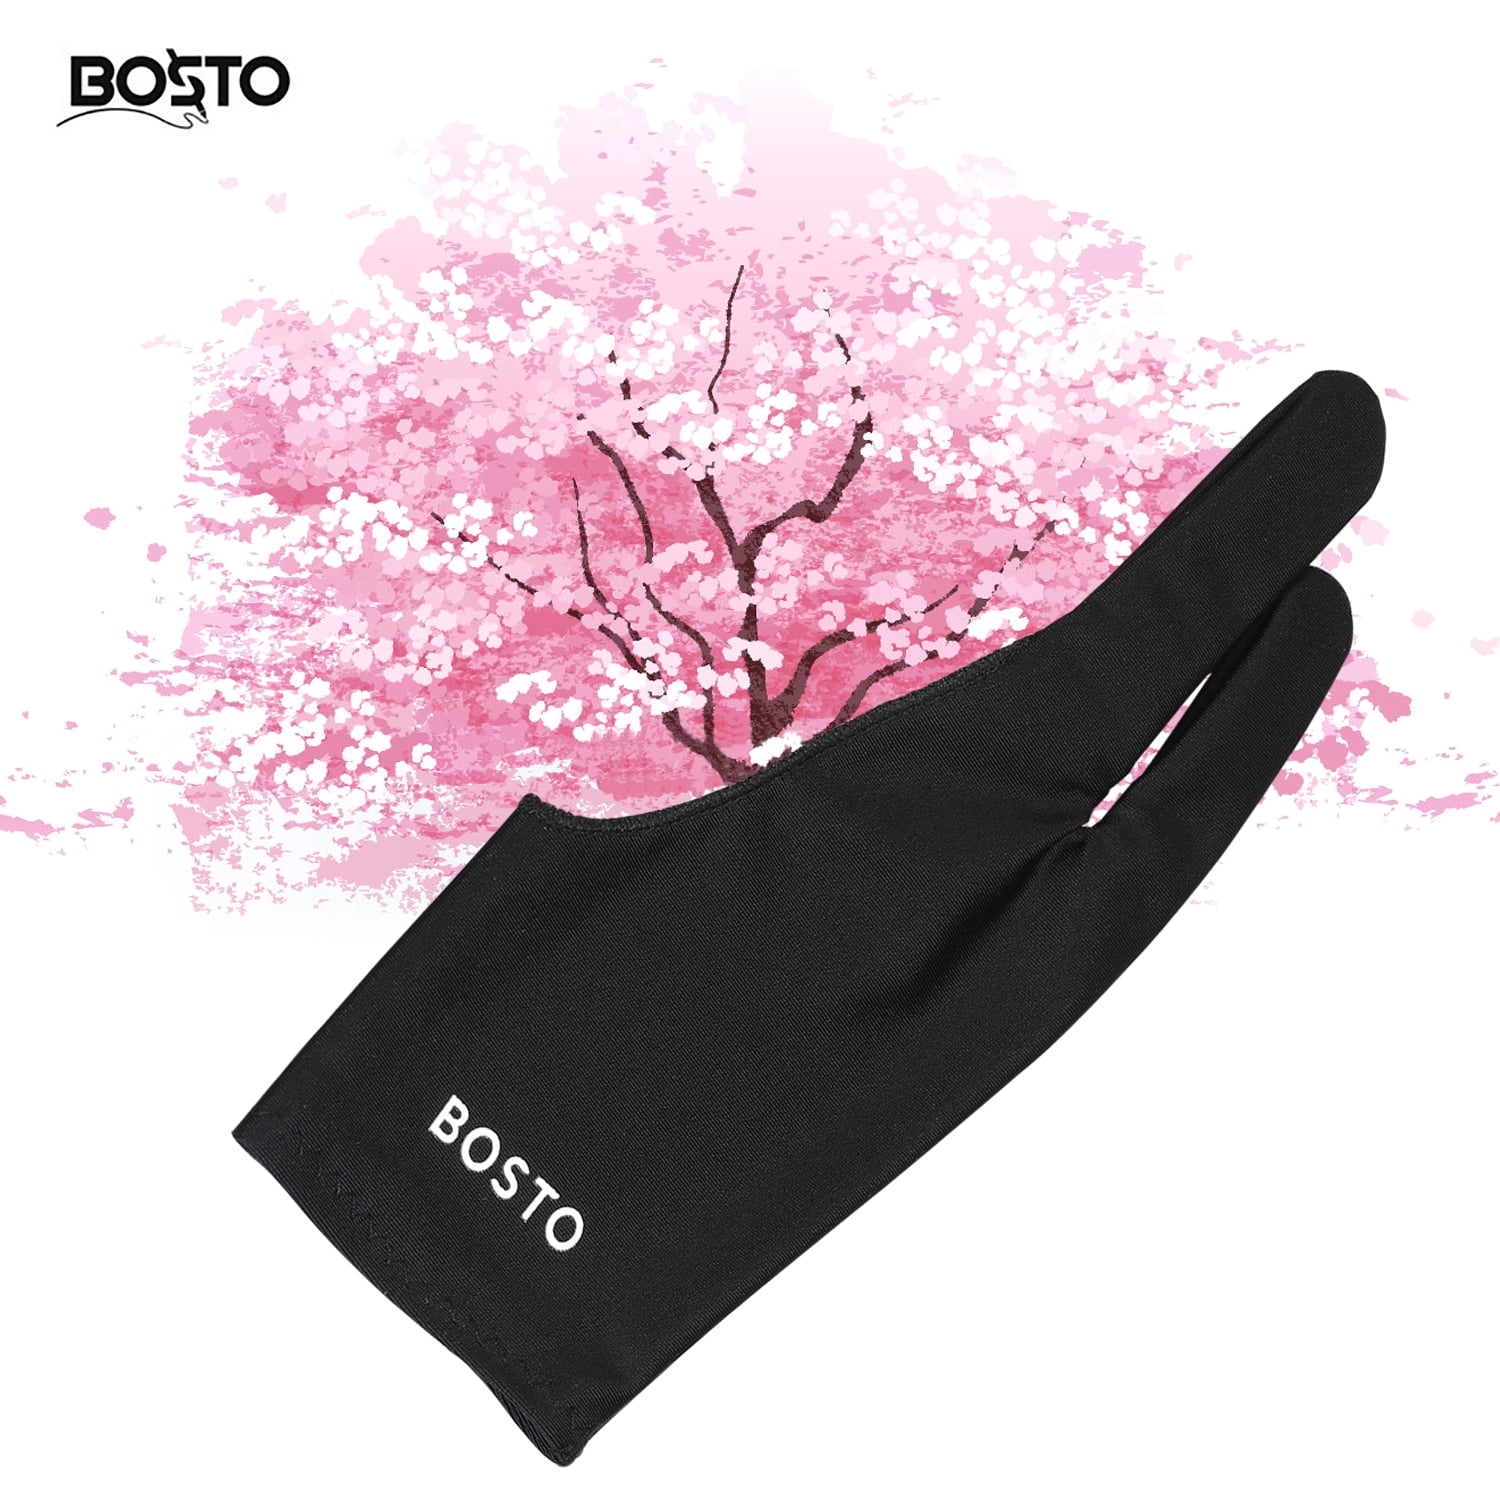 BOSTO Two-Finger Free Size Drawing Glove Artist Tablet Drawing Glove for Right & Left Hand Compatible with BOSTO/UGEE/Huion/Wacom Graphics Drawing Tablets